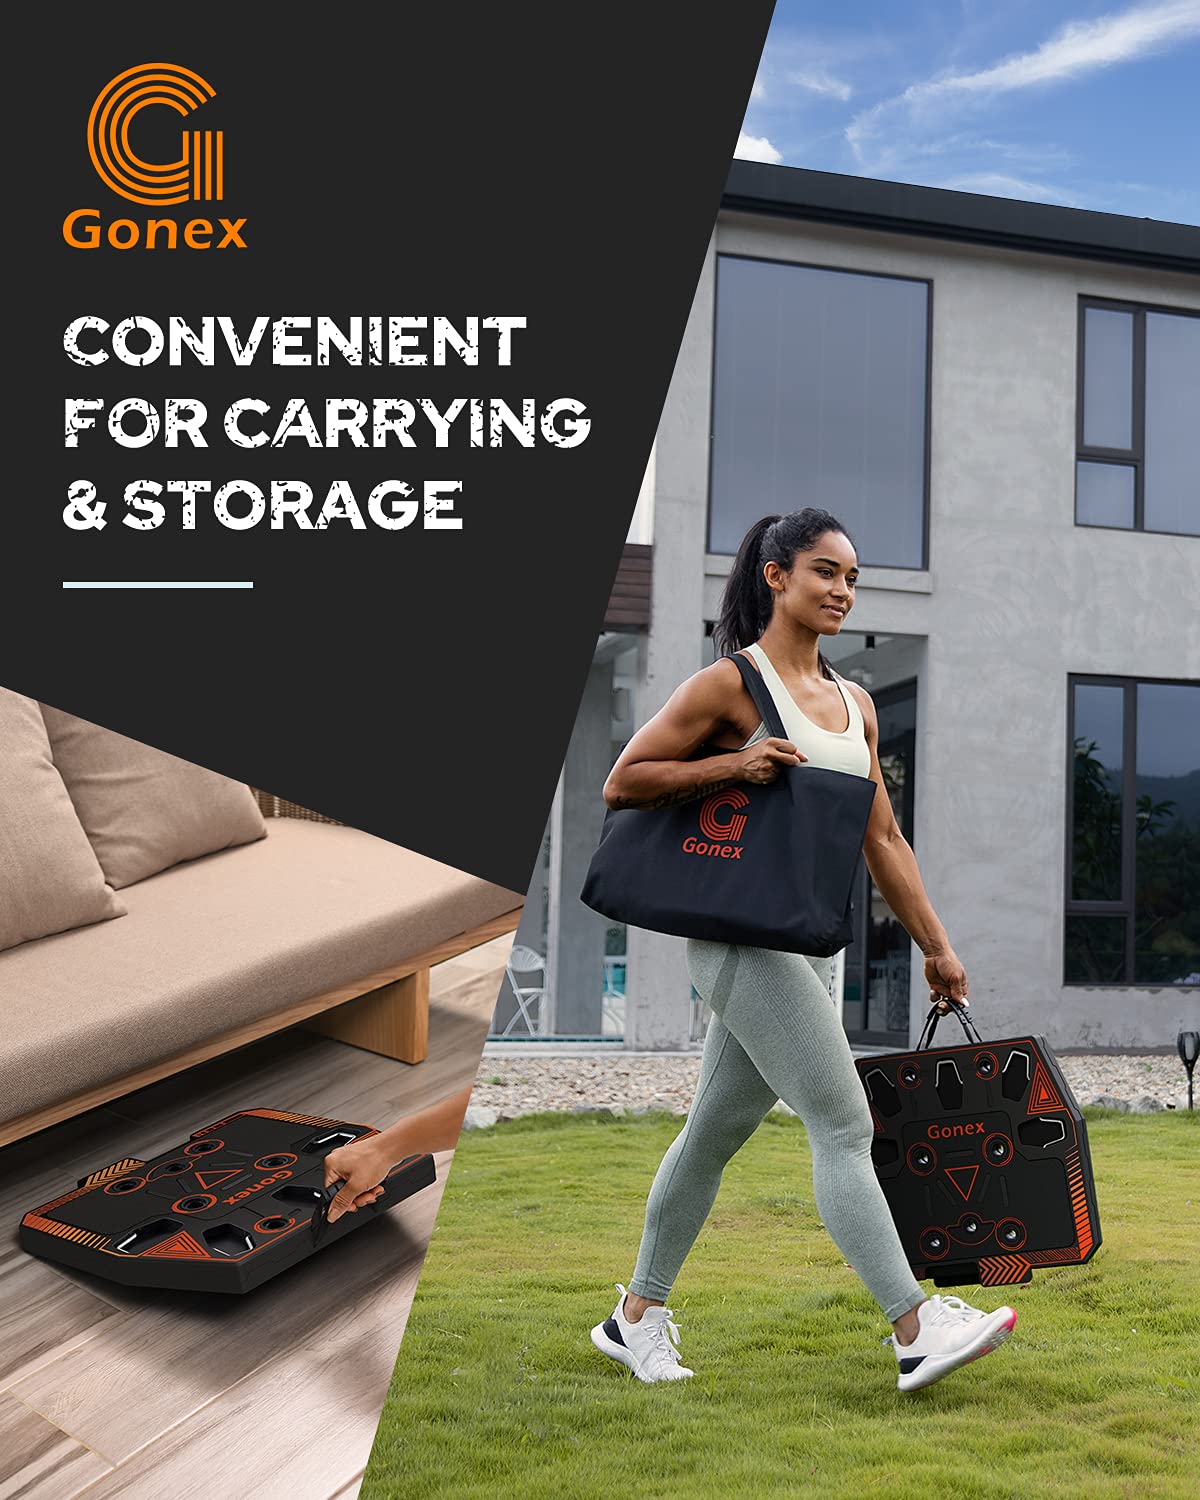 Gonex Portable Home Gym Workout Equipment with 14 Exercise Accessories Ab Roller Wheel,Elastic Resistance Bands,Push-up Stand,Post Landmine Sleeve and More for Full Body Workouts System